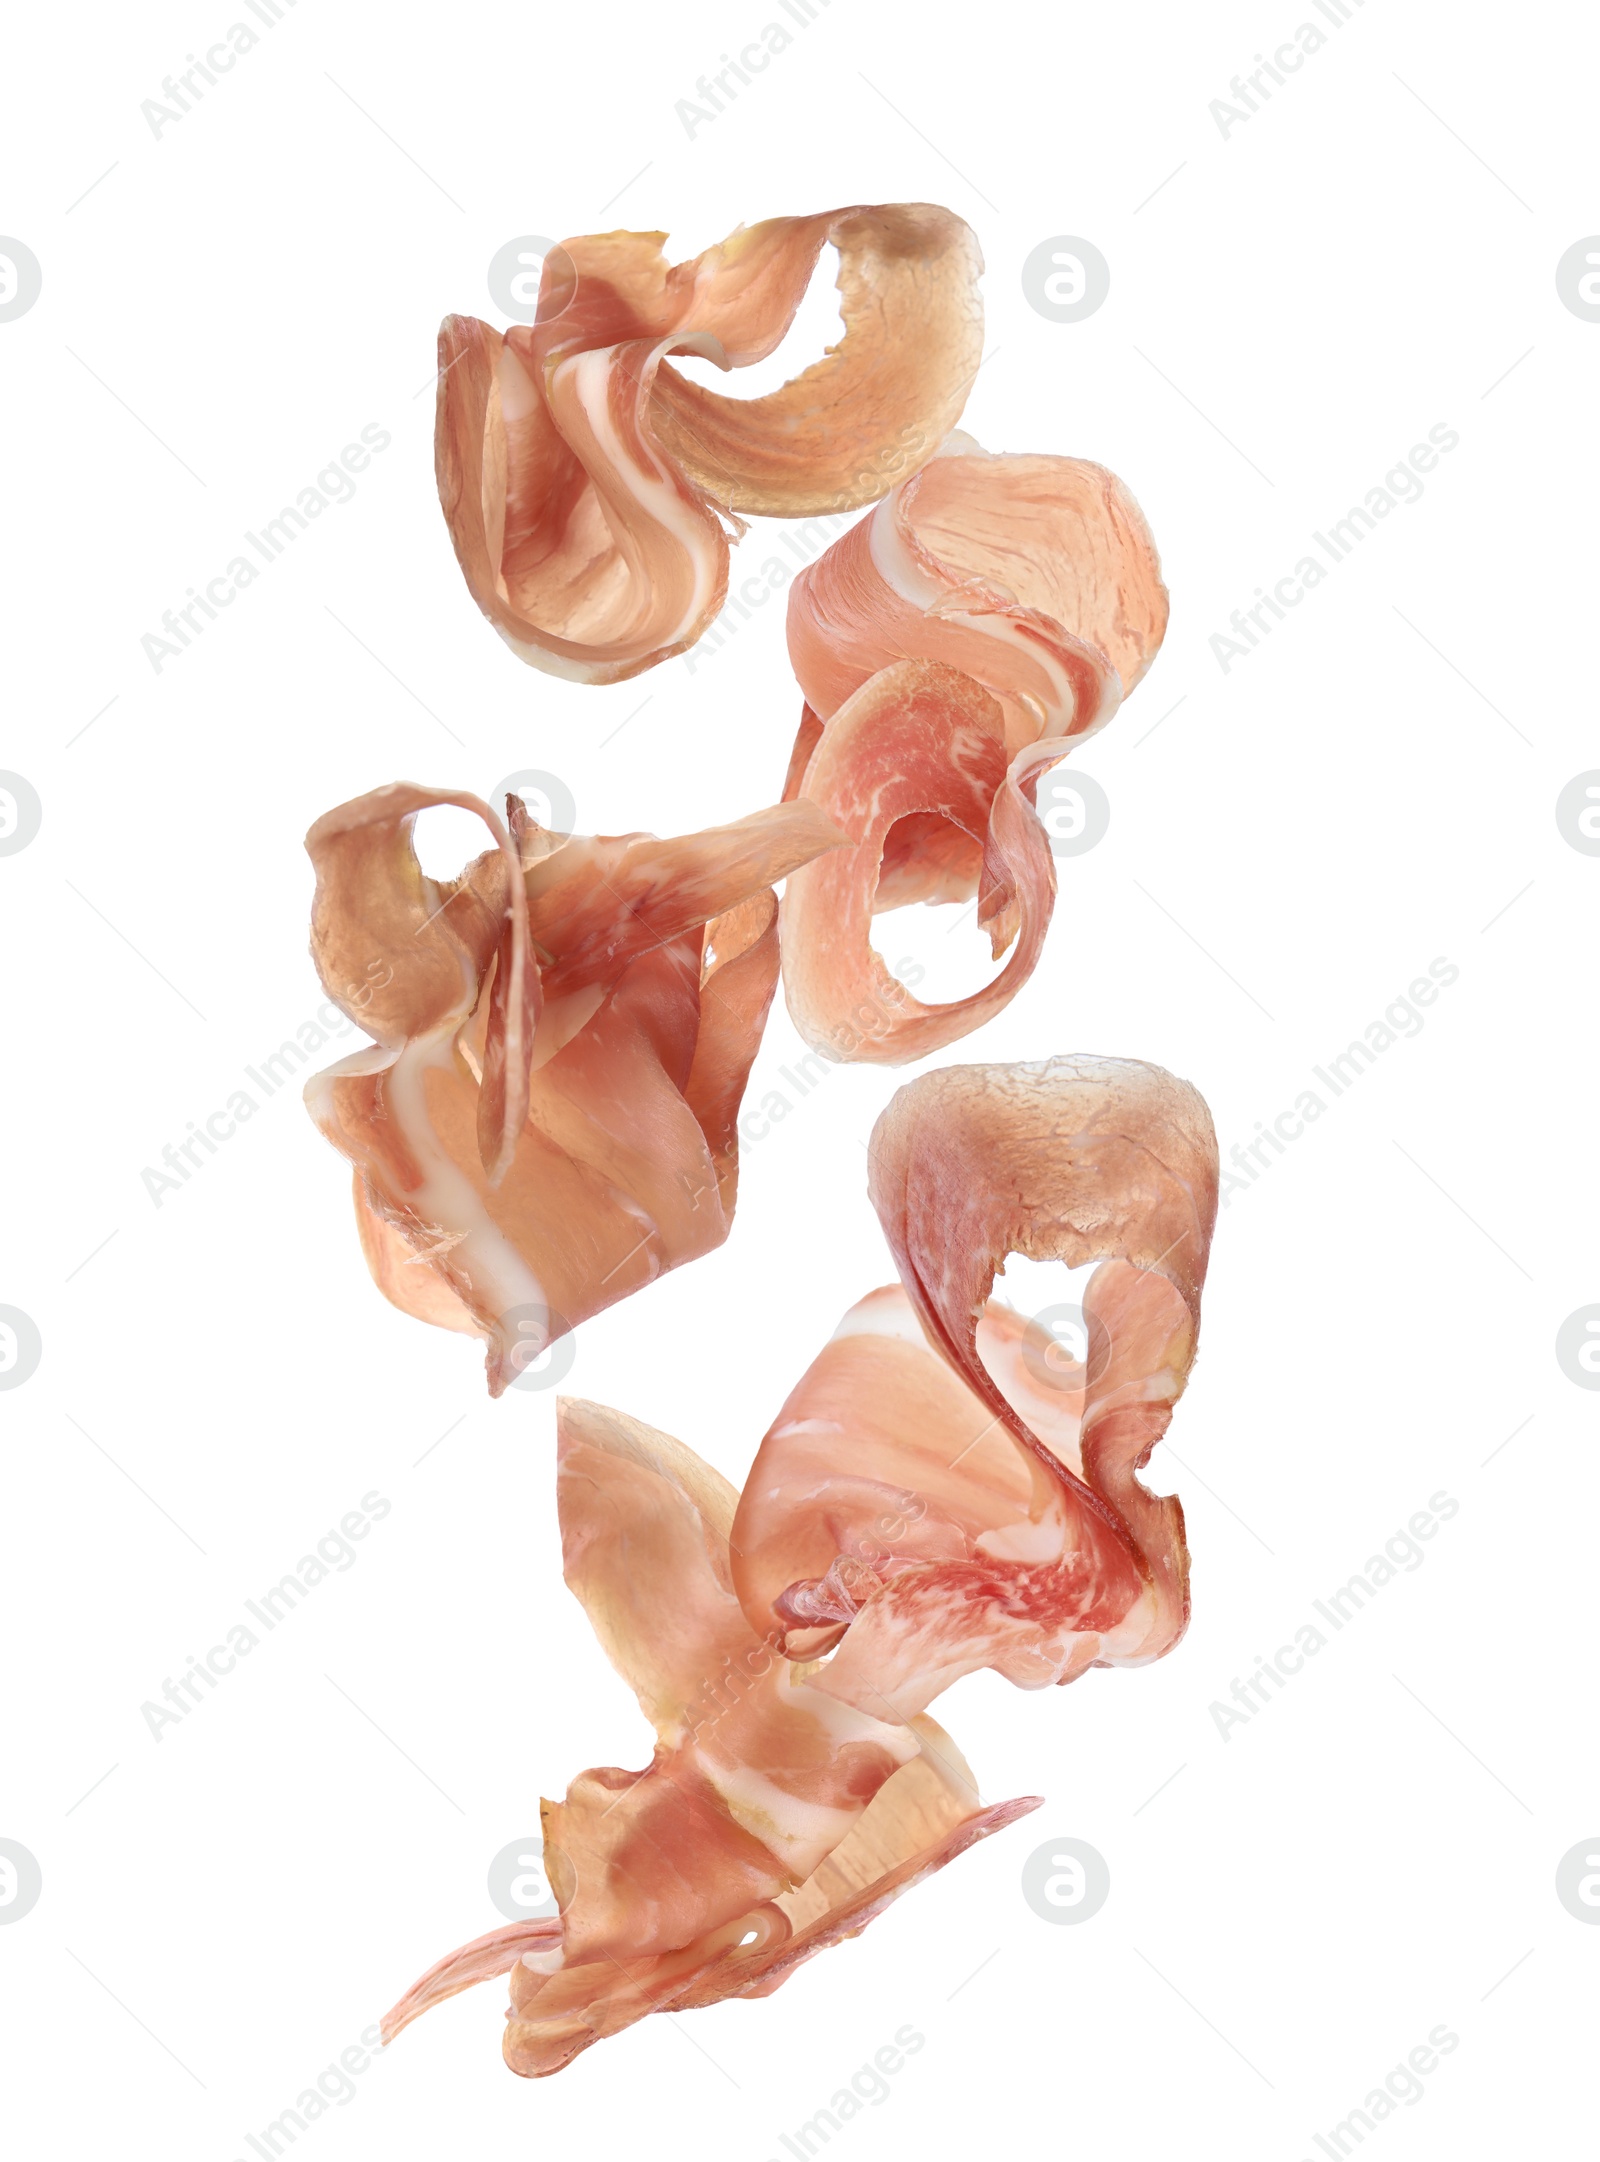 Image of Set of flying cut delicious prosciutto on white background